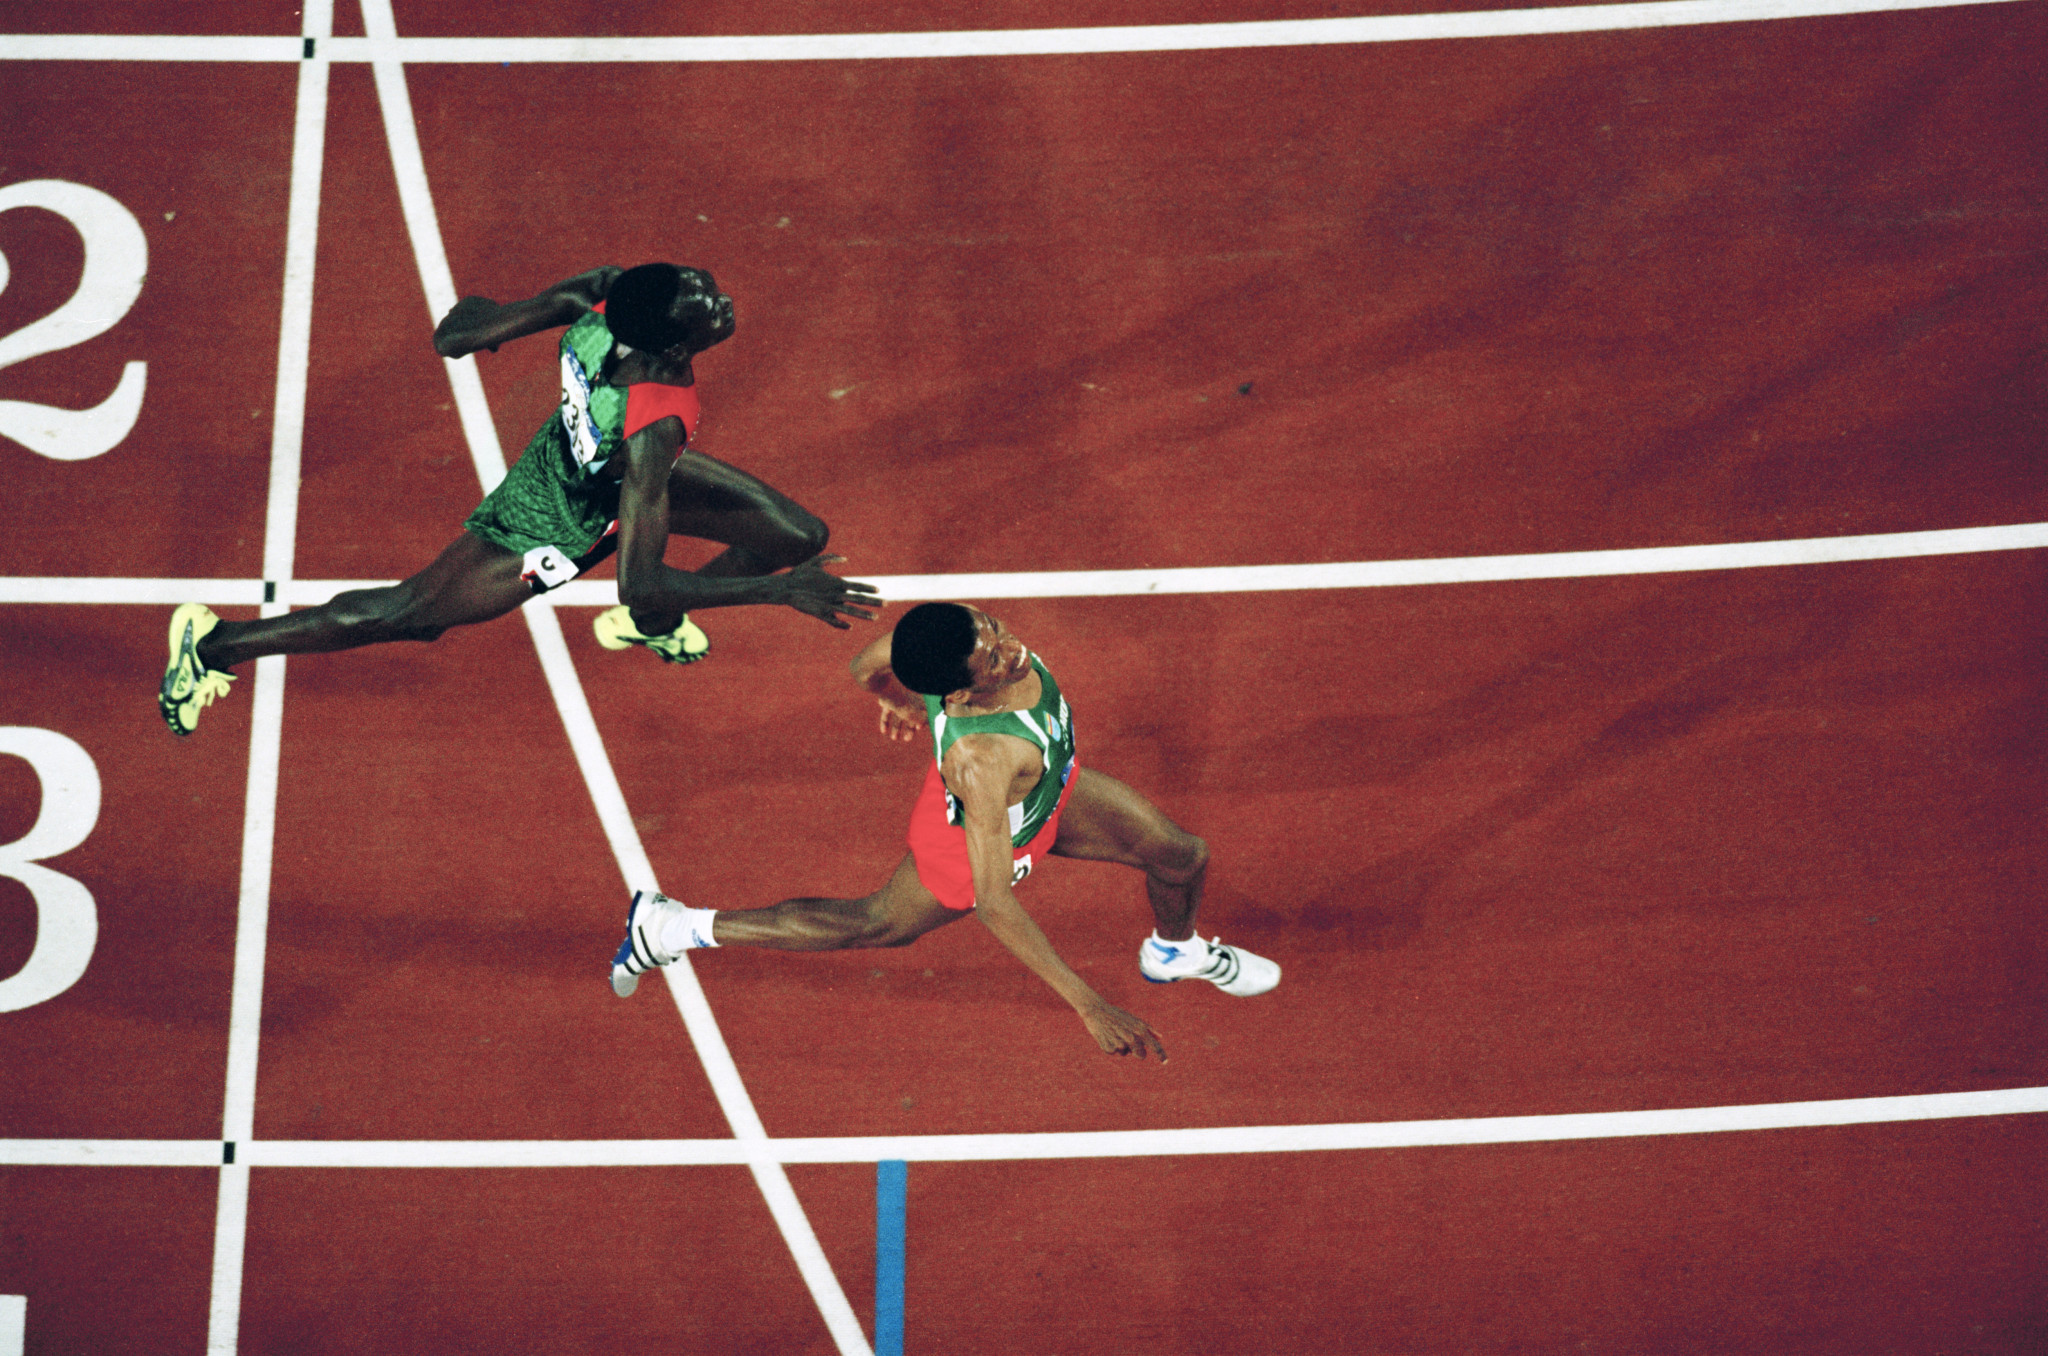 Might athletics be better served if it zoomed in on rivalries rather than times? ©Getty Images